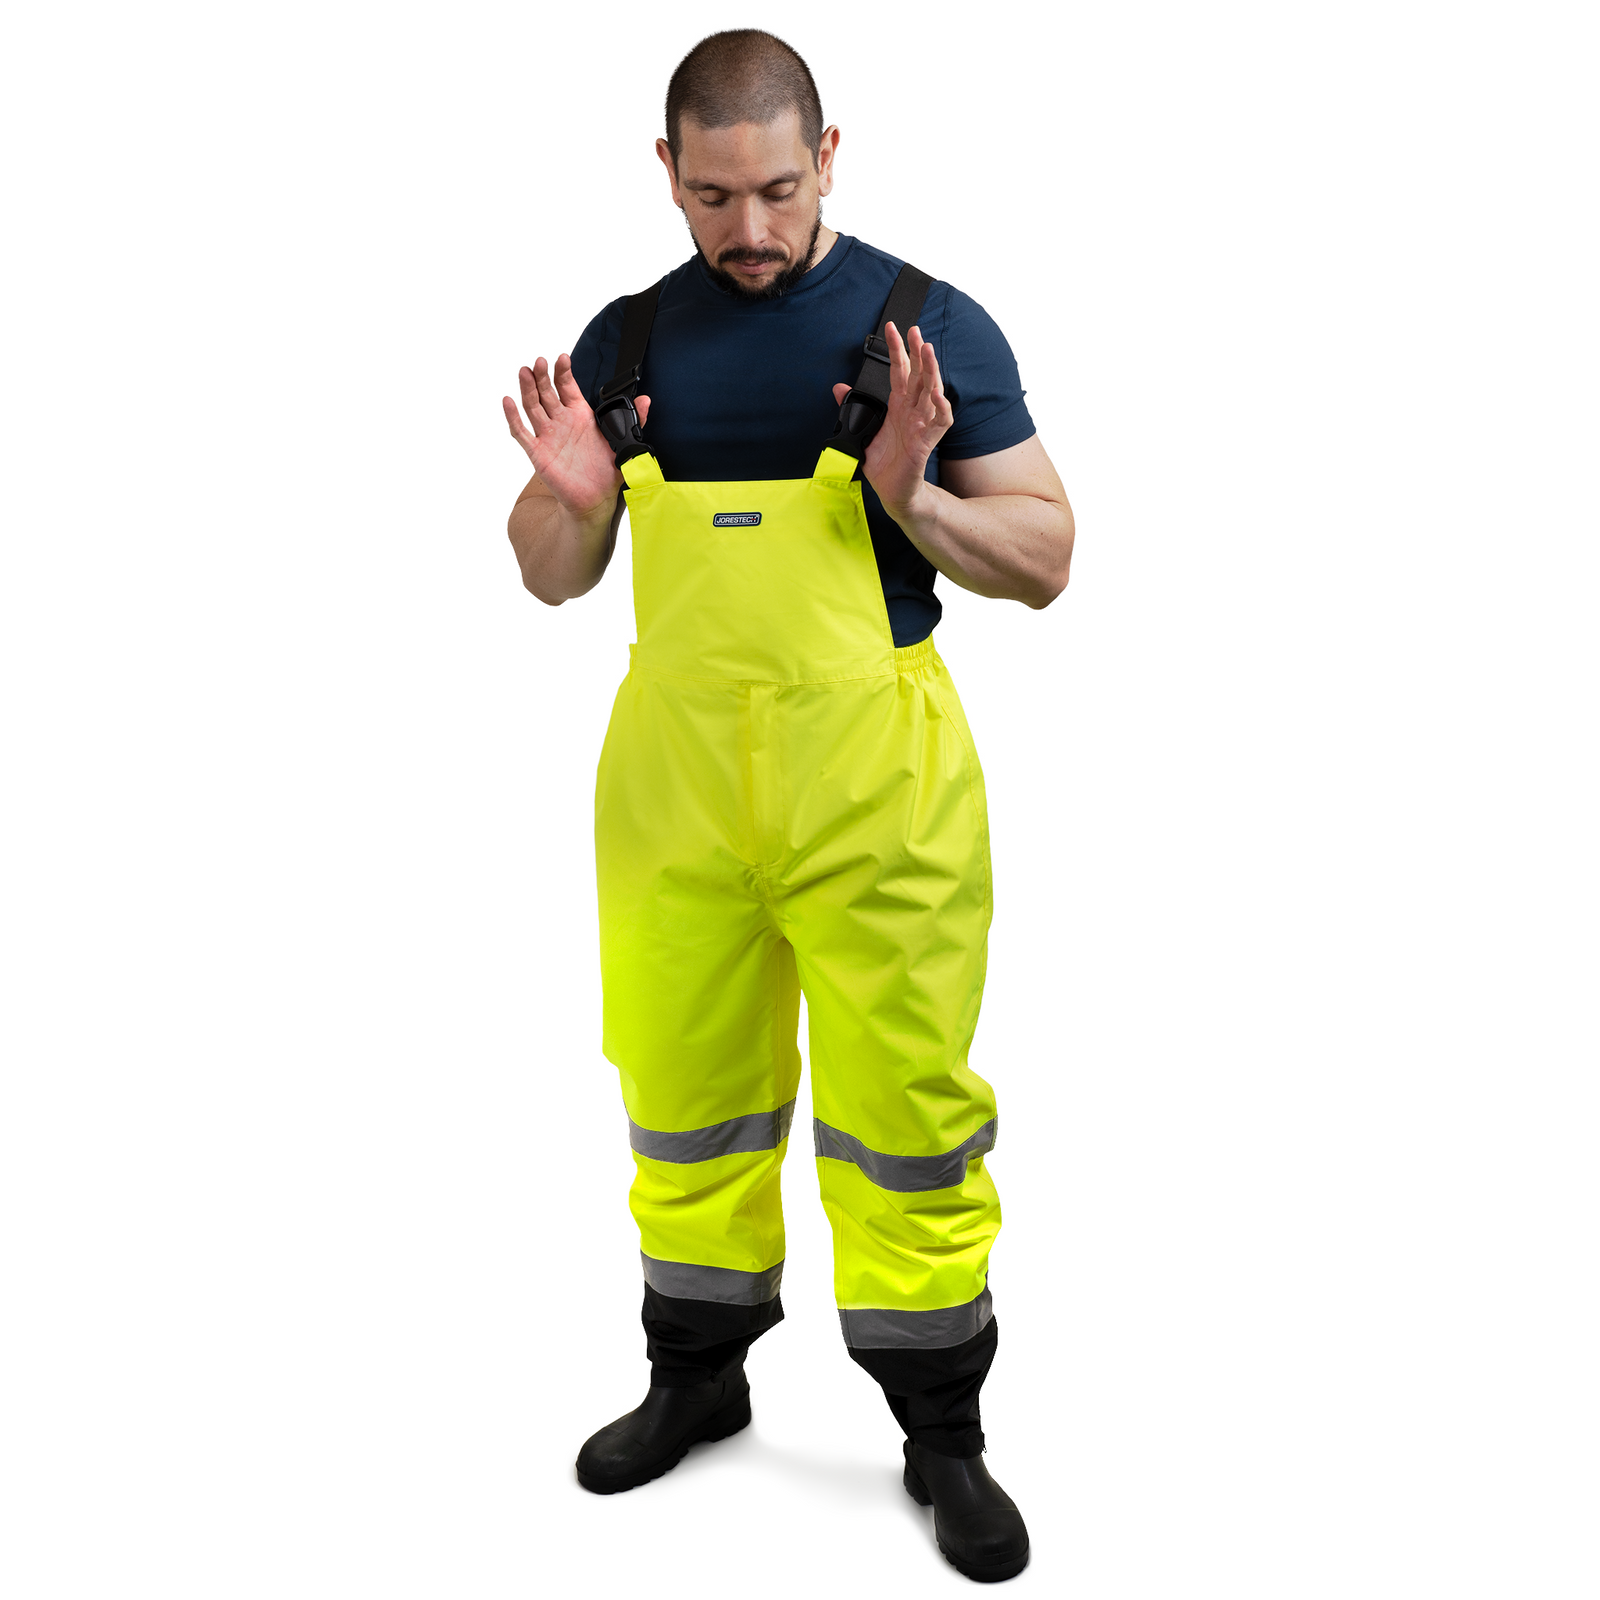 Worker wearing the hi visibility yellow and black safety overall work pants with reflective stripes